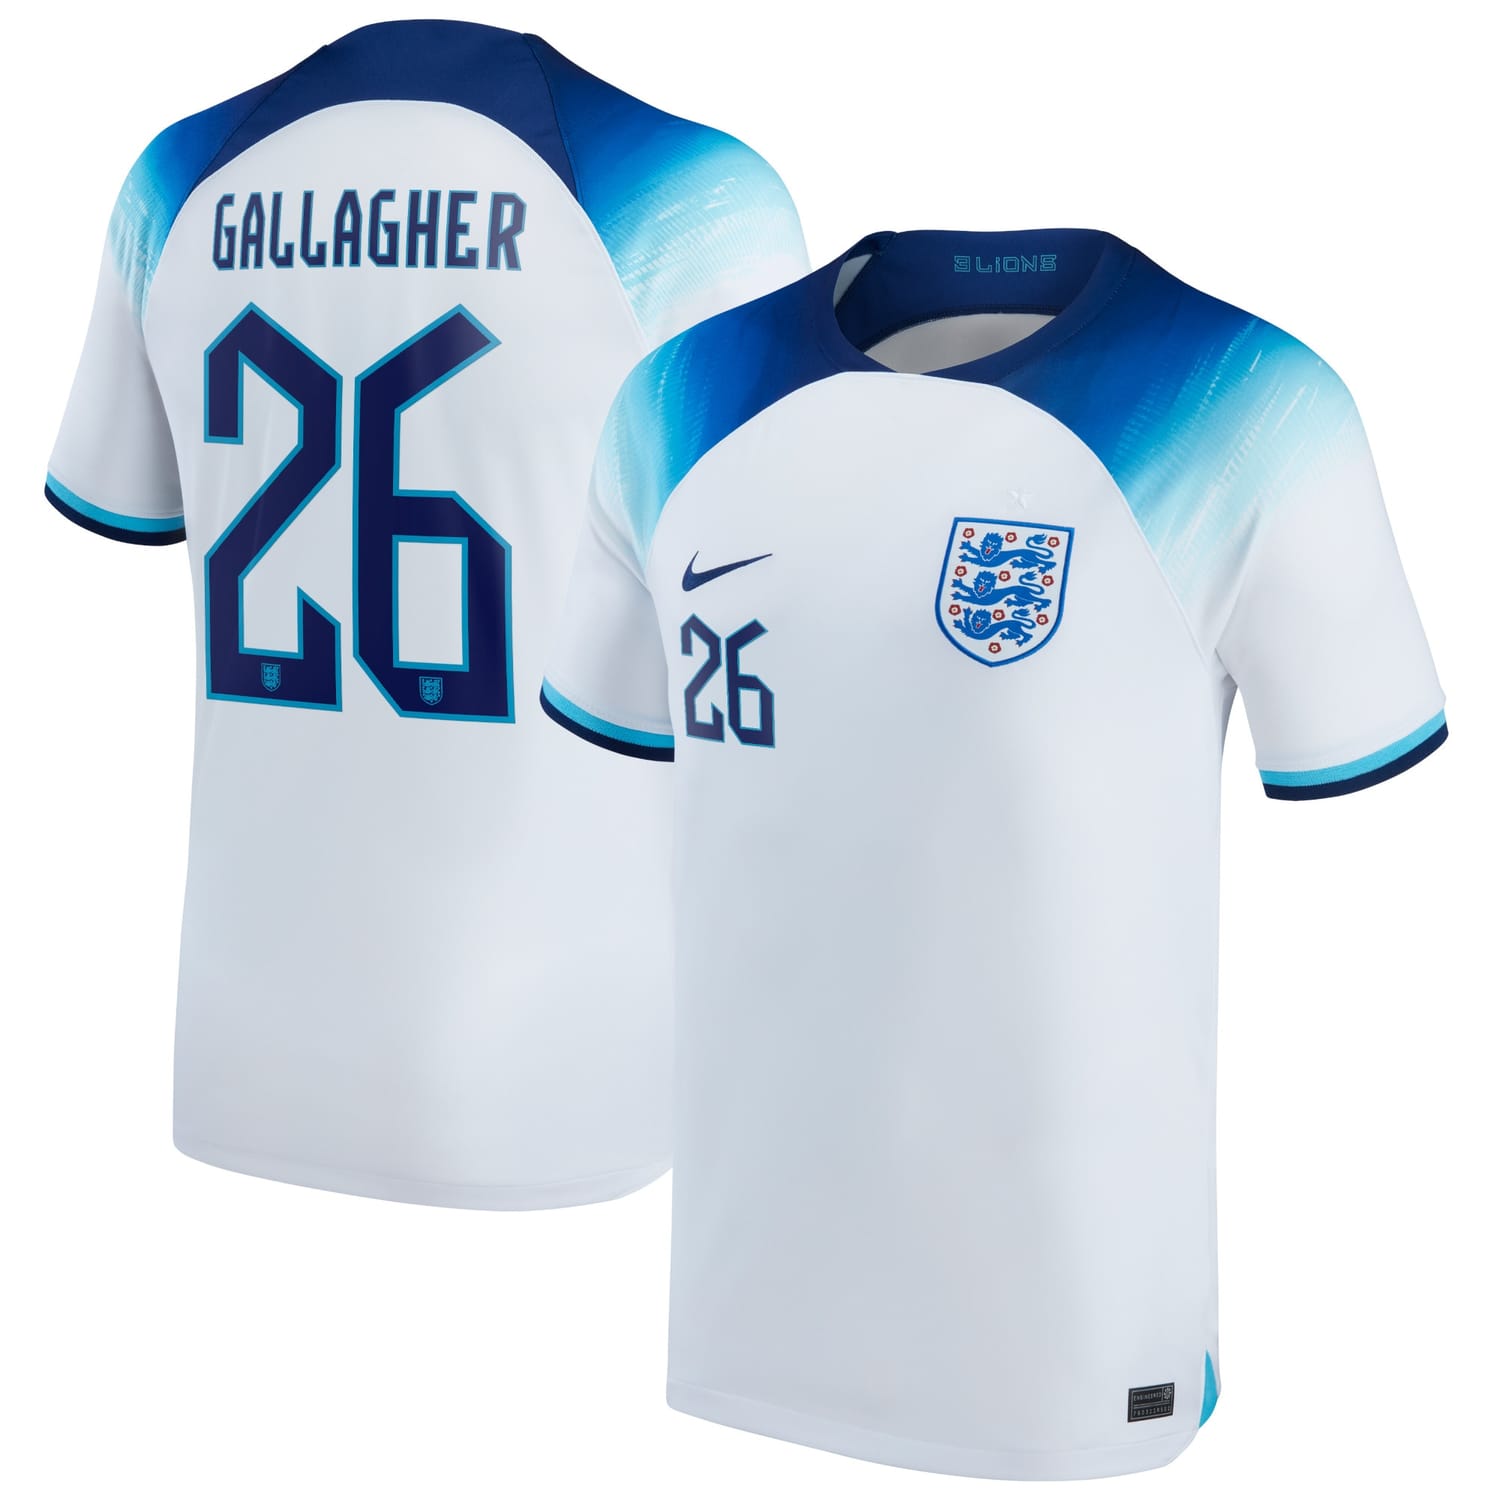 England National Team Home Jersey Shirt 2022 player Conor Gallagher 26 printing for Men